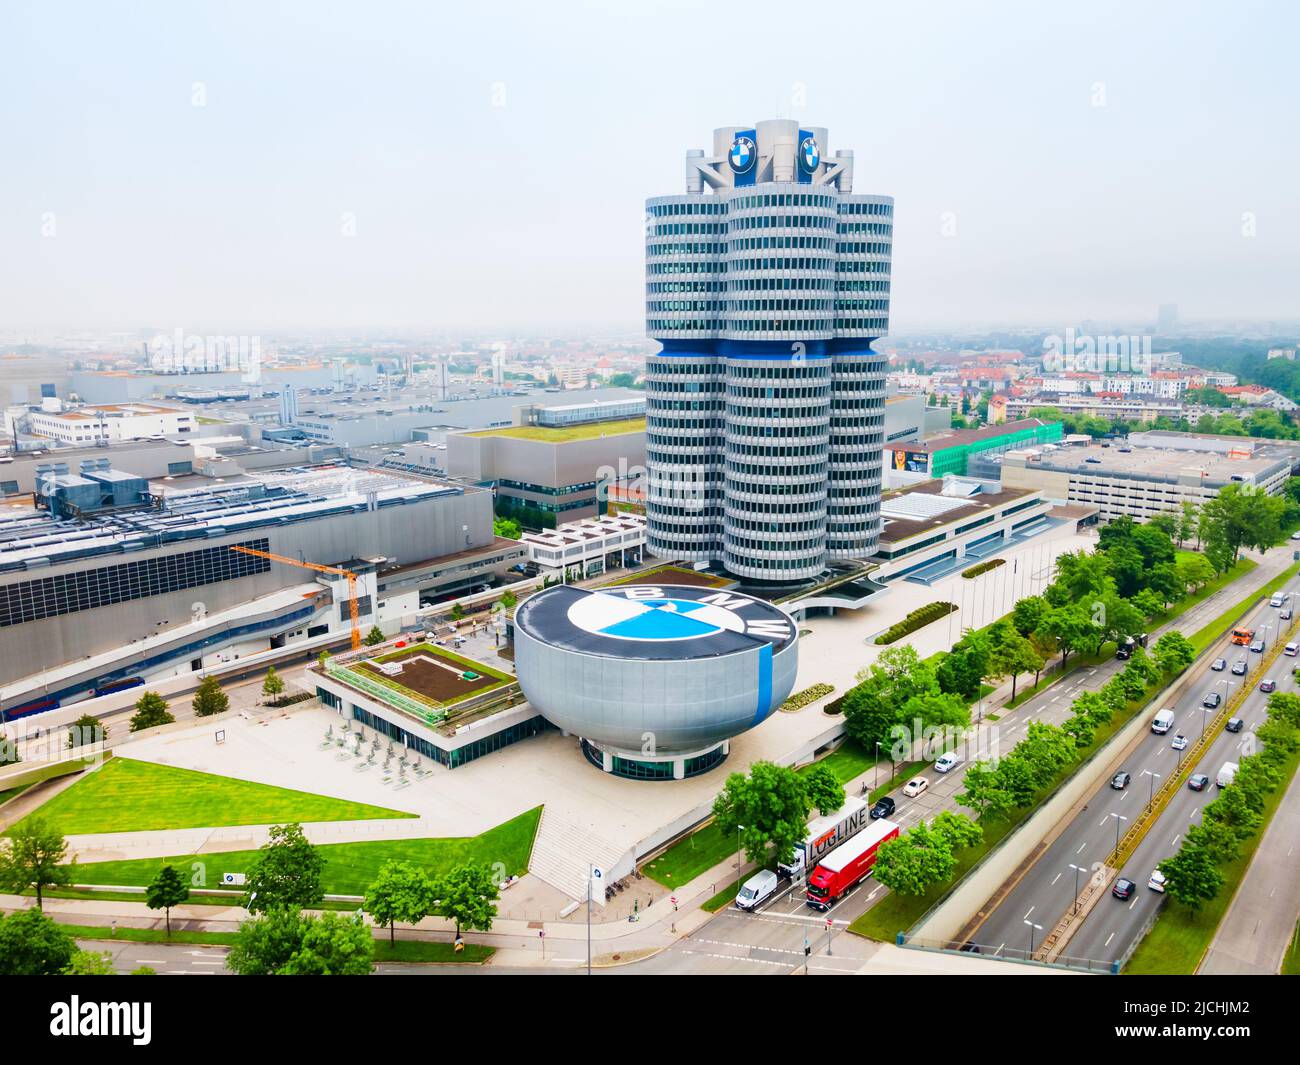 Munich, Germany - July 08, 2021: BMW Museum aerial panoramic view, it is an automobile museum of BMW history located near the Olympiapark in Munich, G Stock Photo